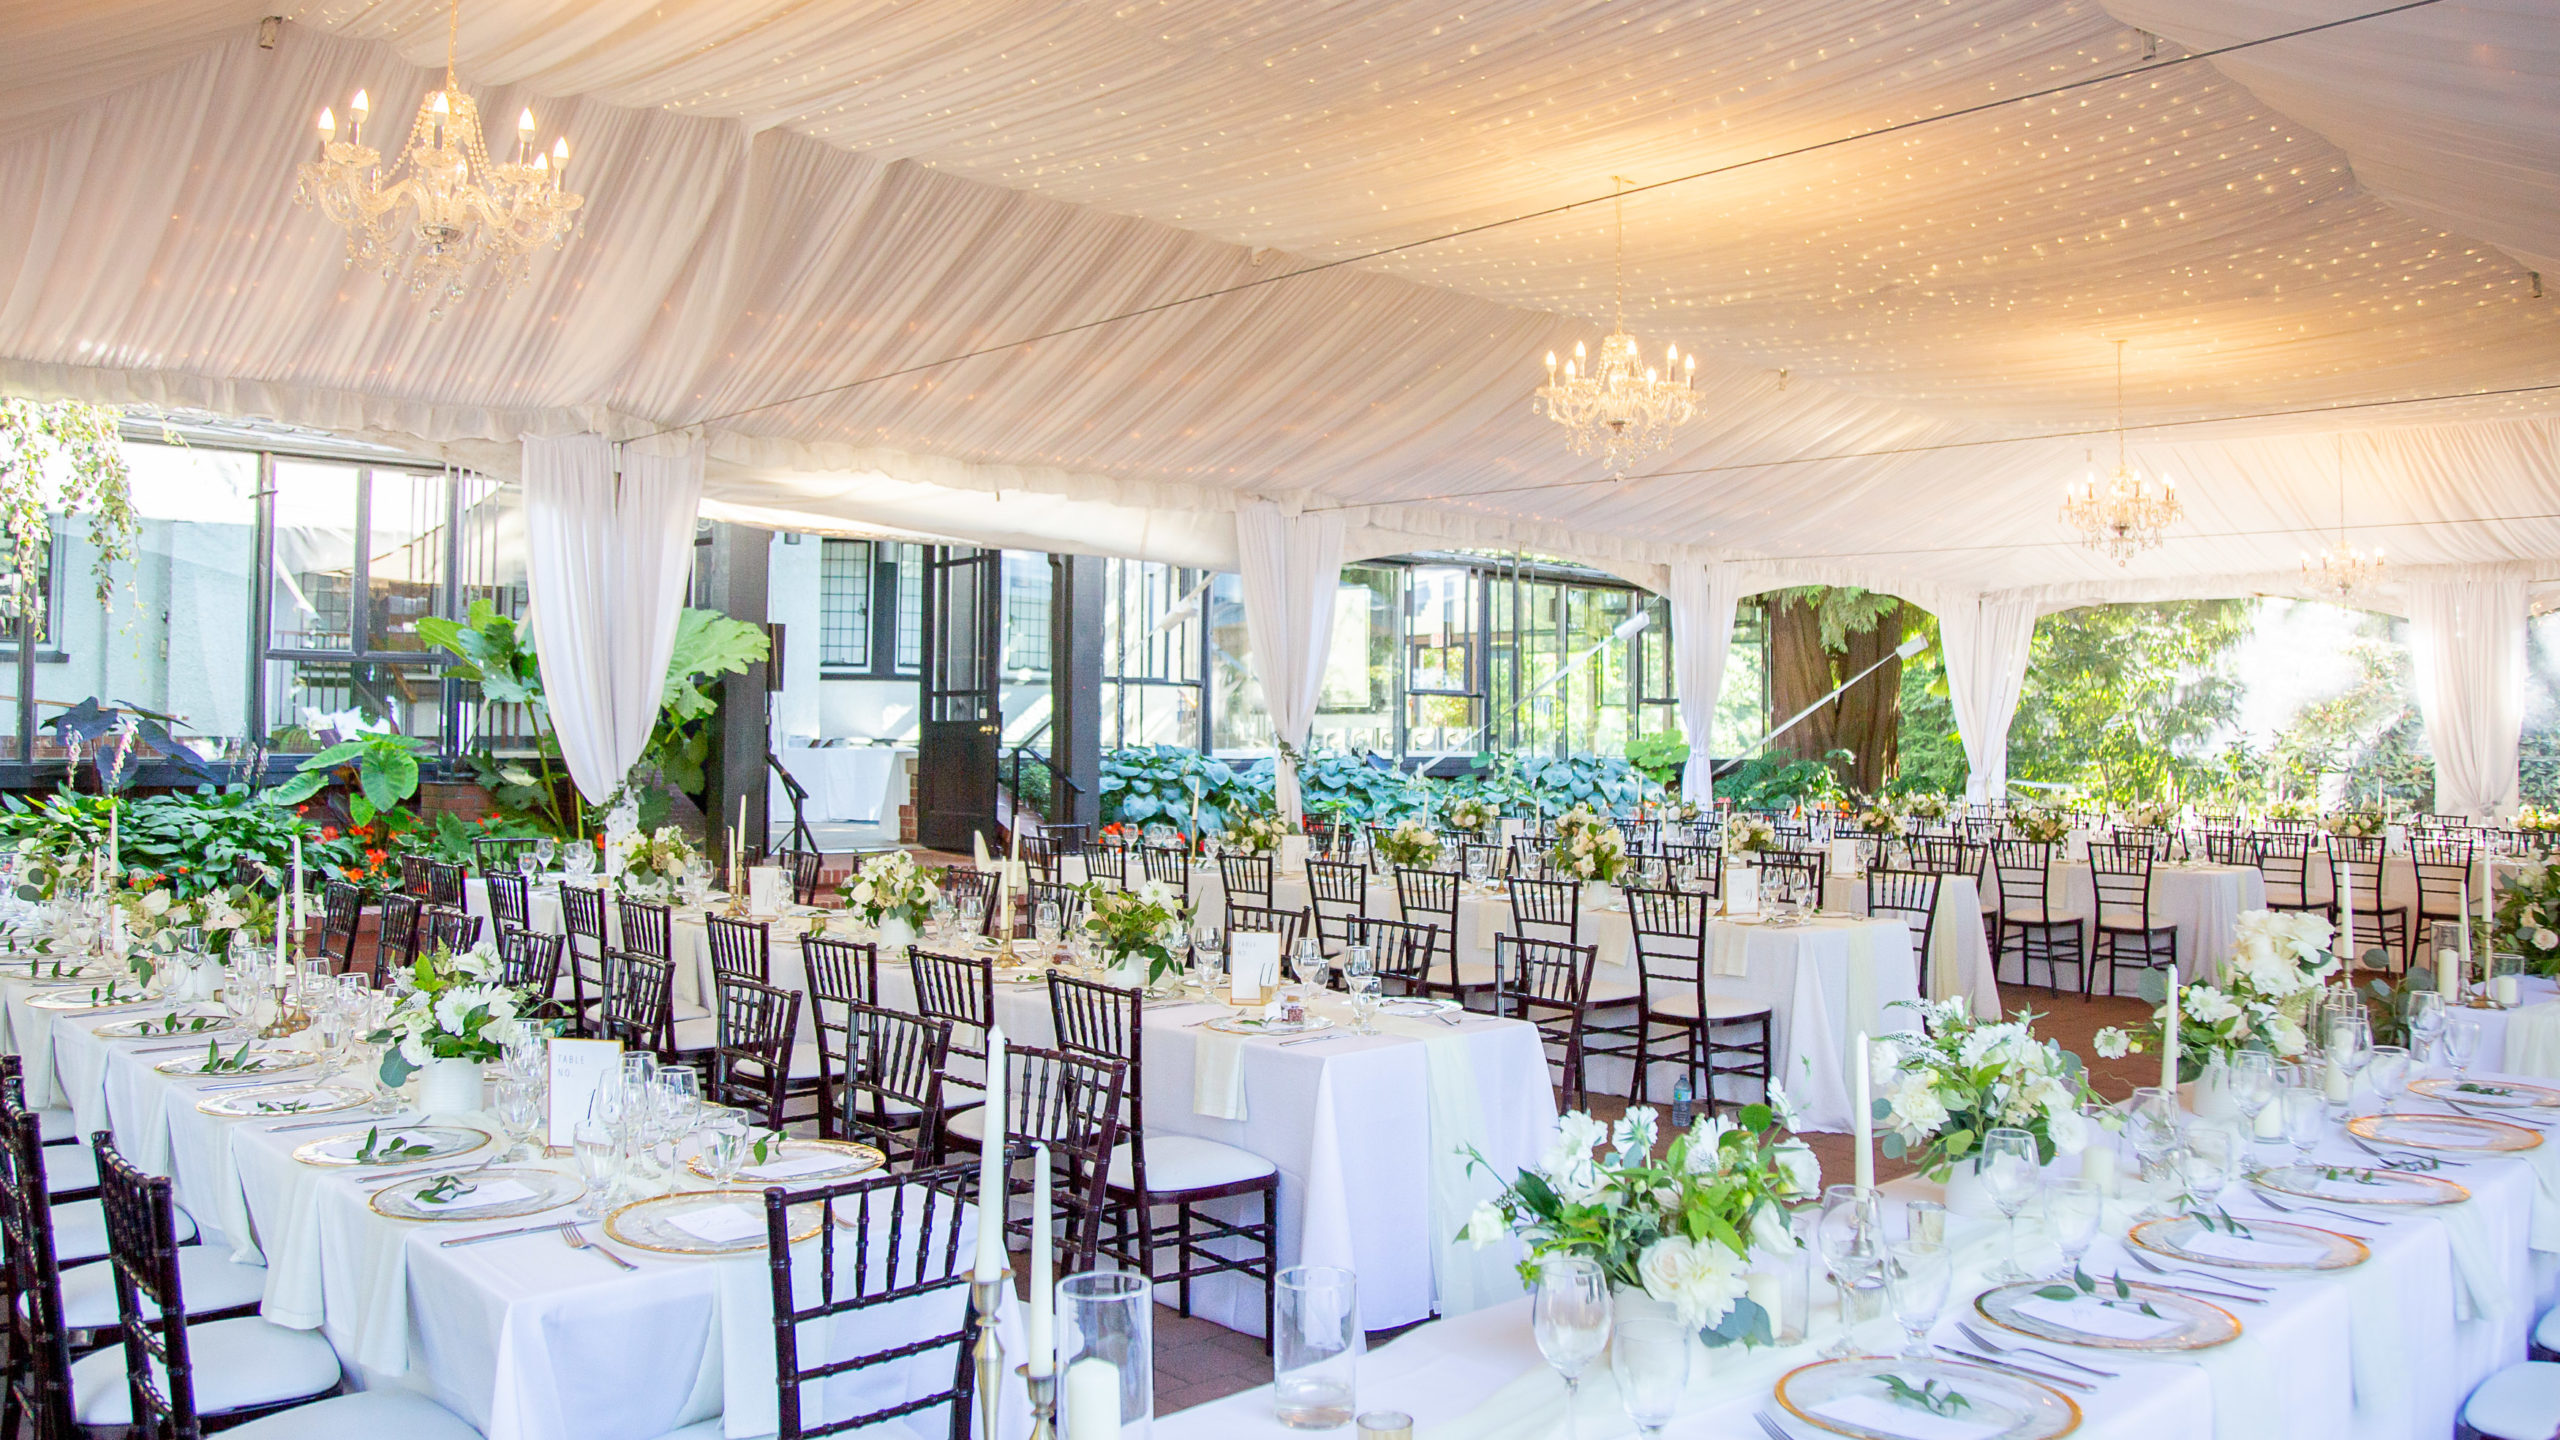 Wide angle photo of the brockhouse restaurant venue with wedding decor. White linens, brown chiffre chairs, warm toned chandeliers and greenery.